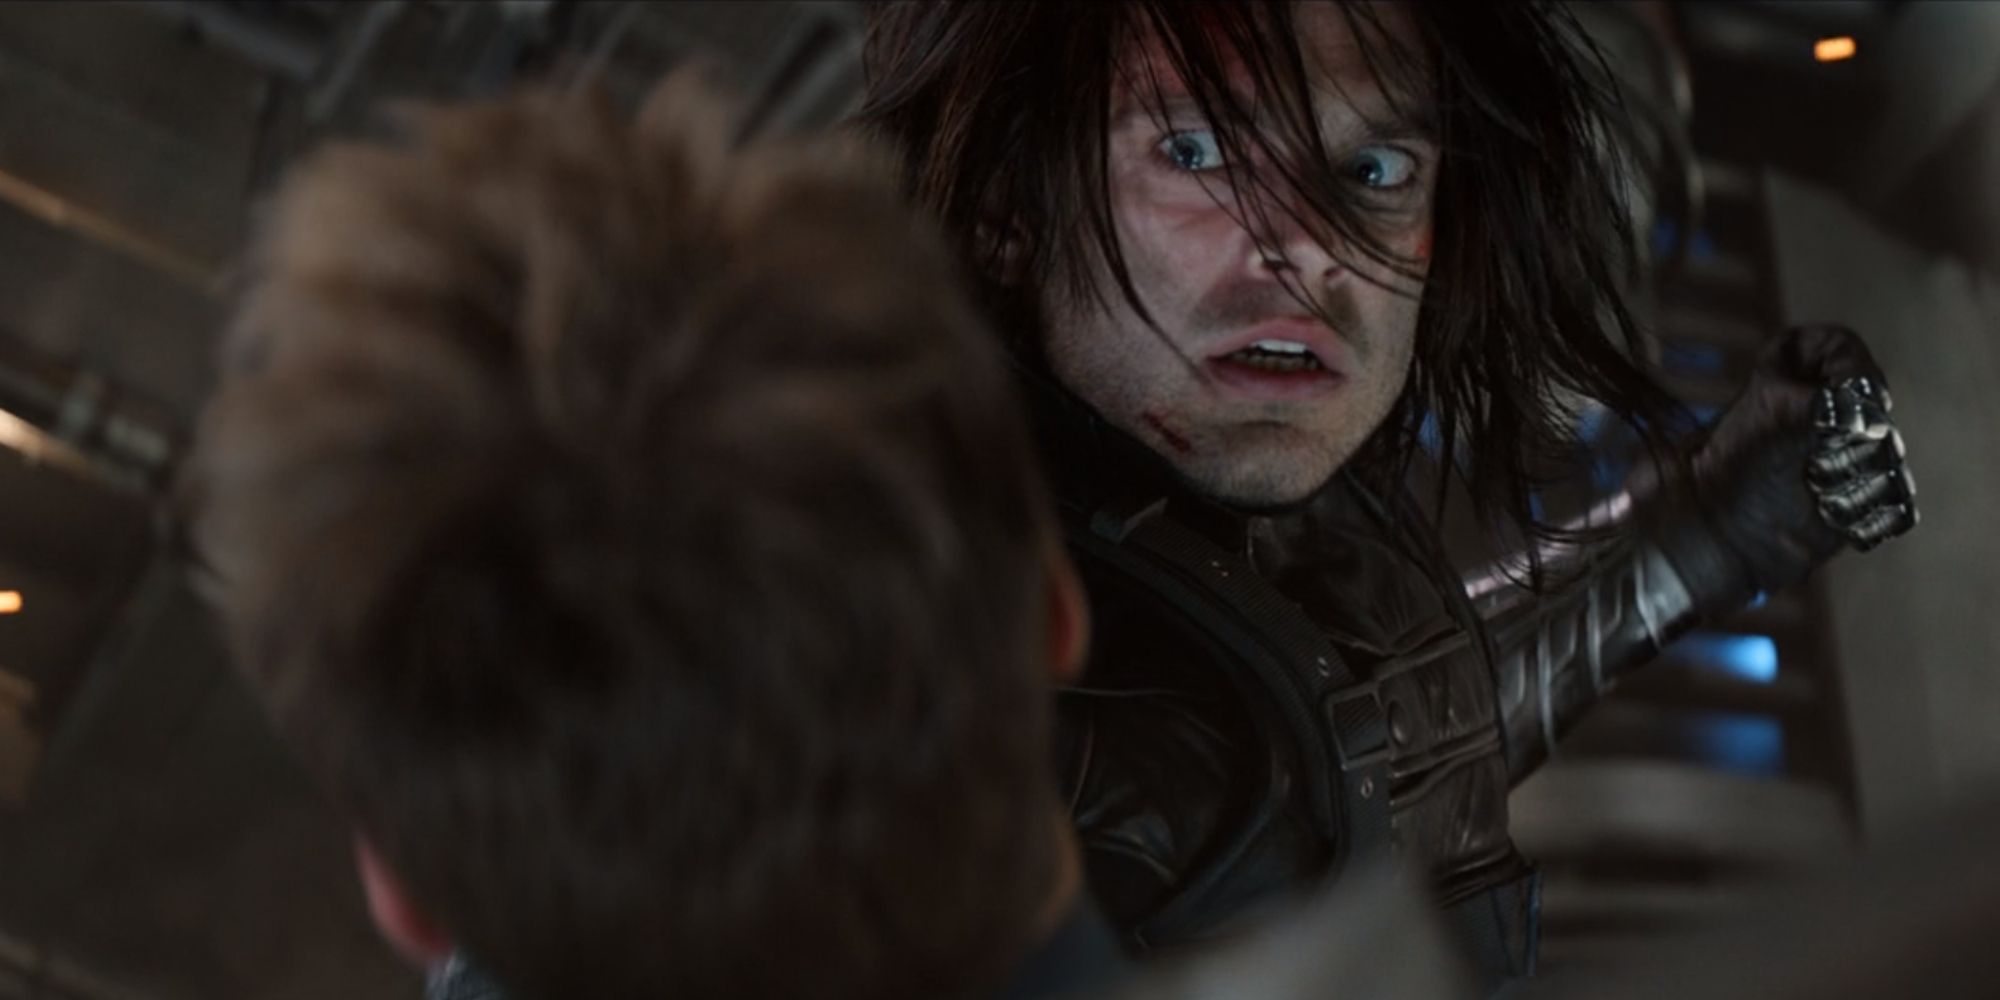 Bucky as the Winter Soldier remembering who he once was in Captain America The Winter Soldier (2014)